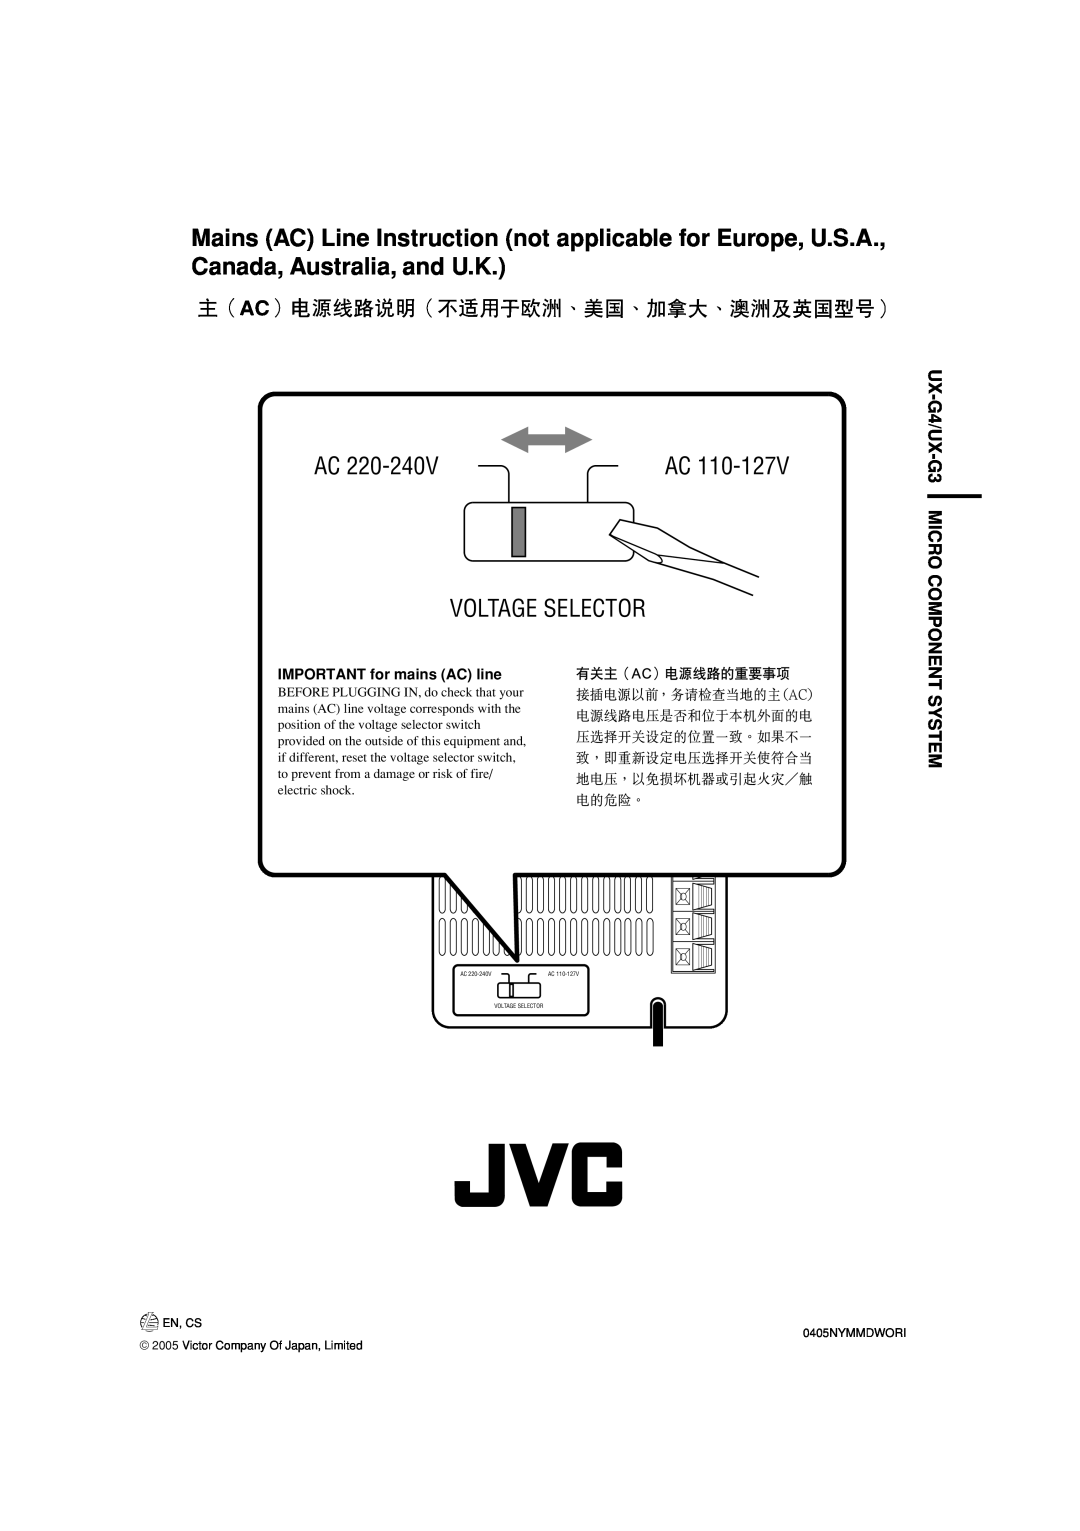 JVC LVT1364-006B manual Voltage Selector, UX-G4/UX-G3MICRO COMPONENT SYSTEM, IMPORTANT for mains AC line 